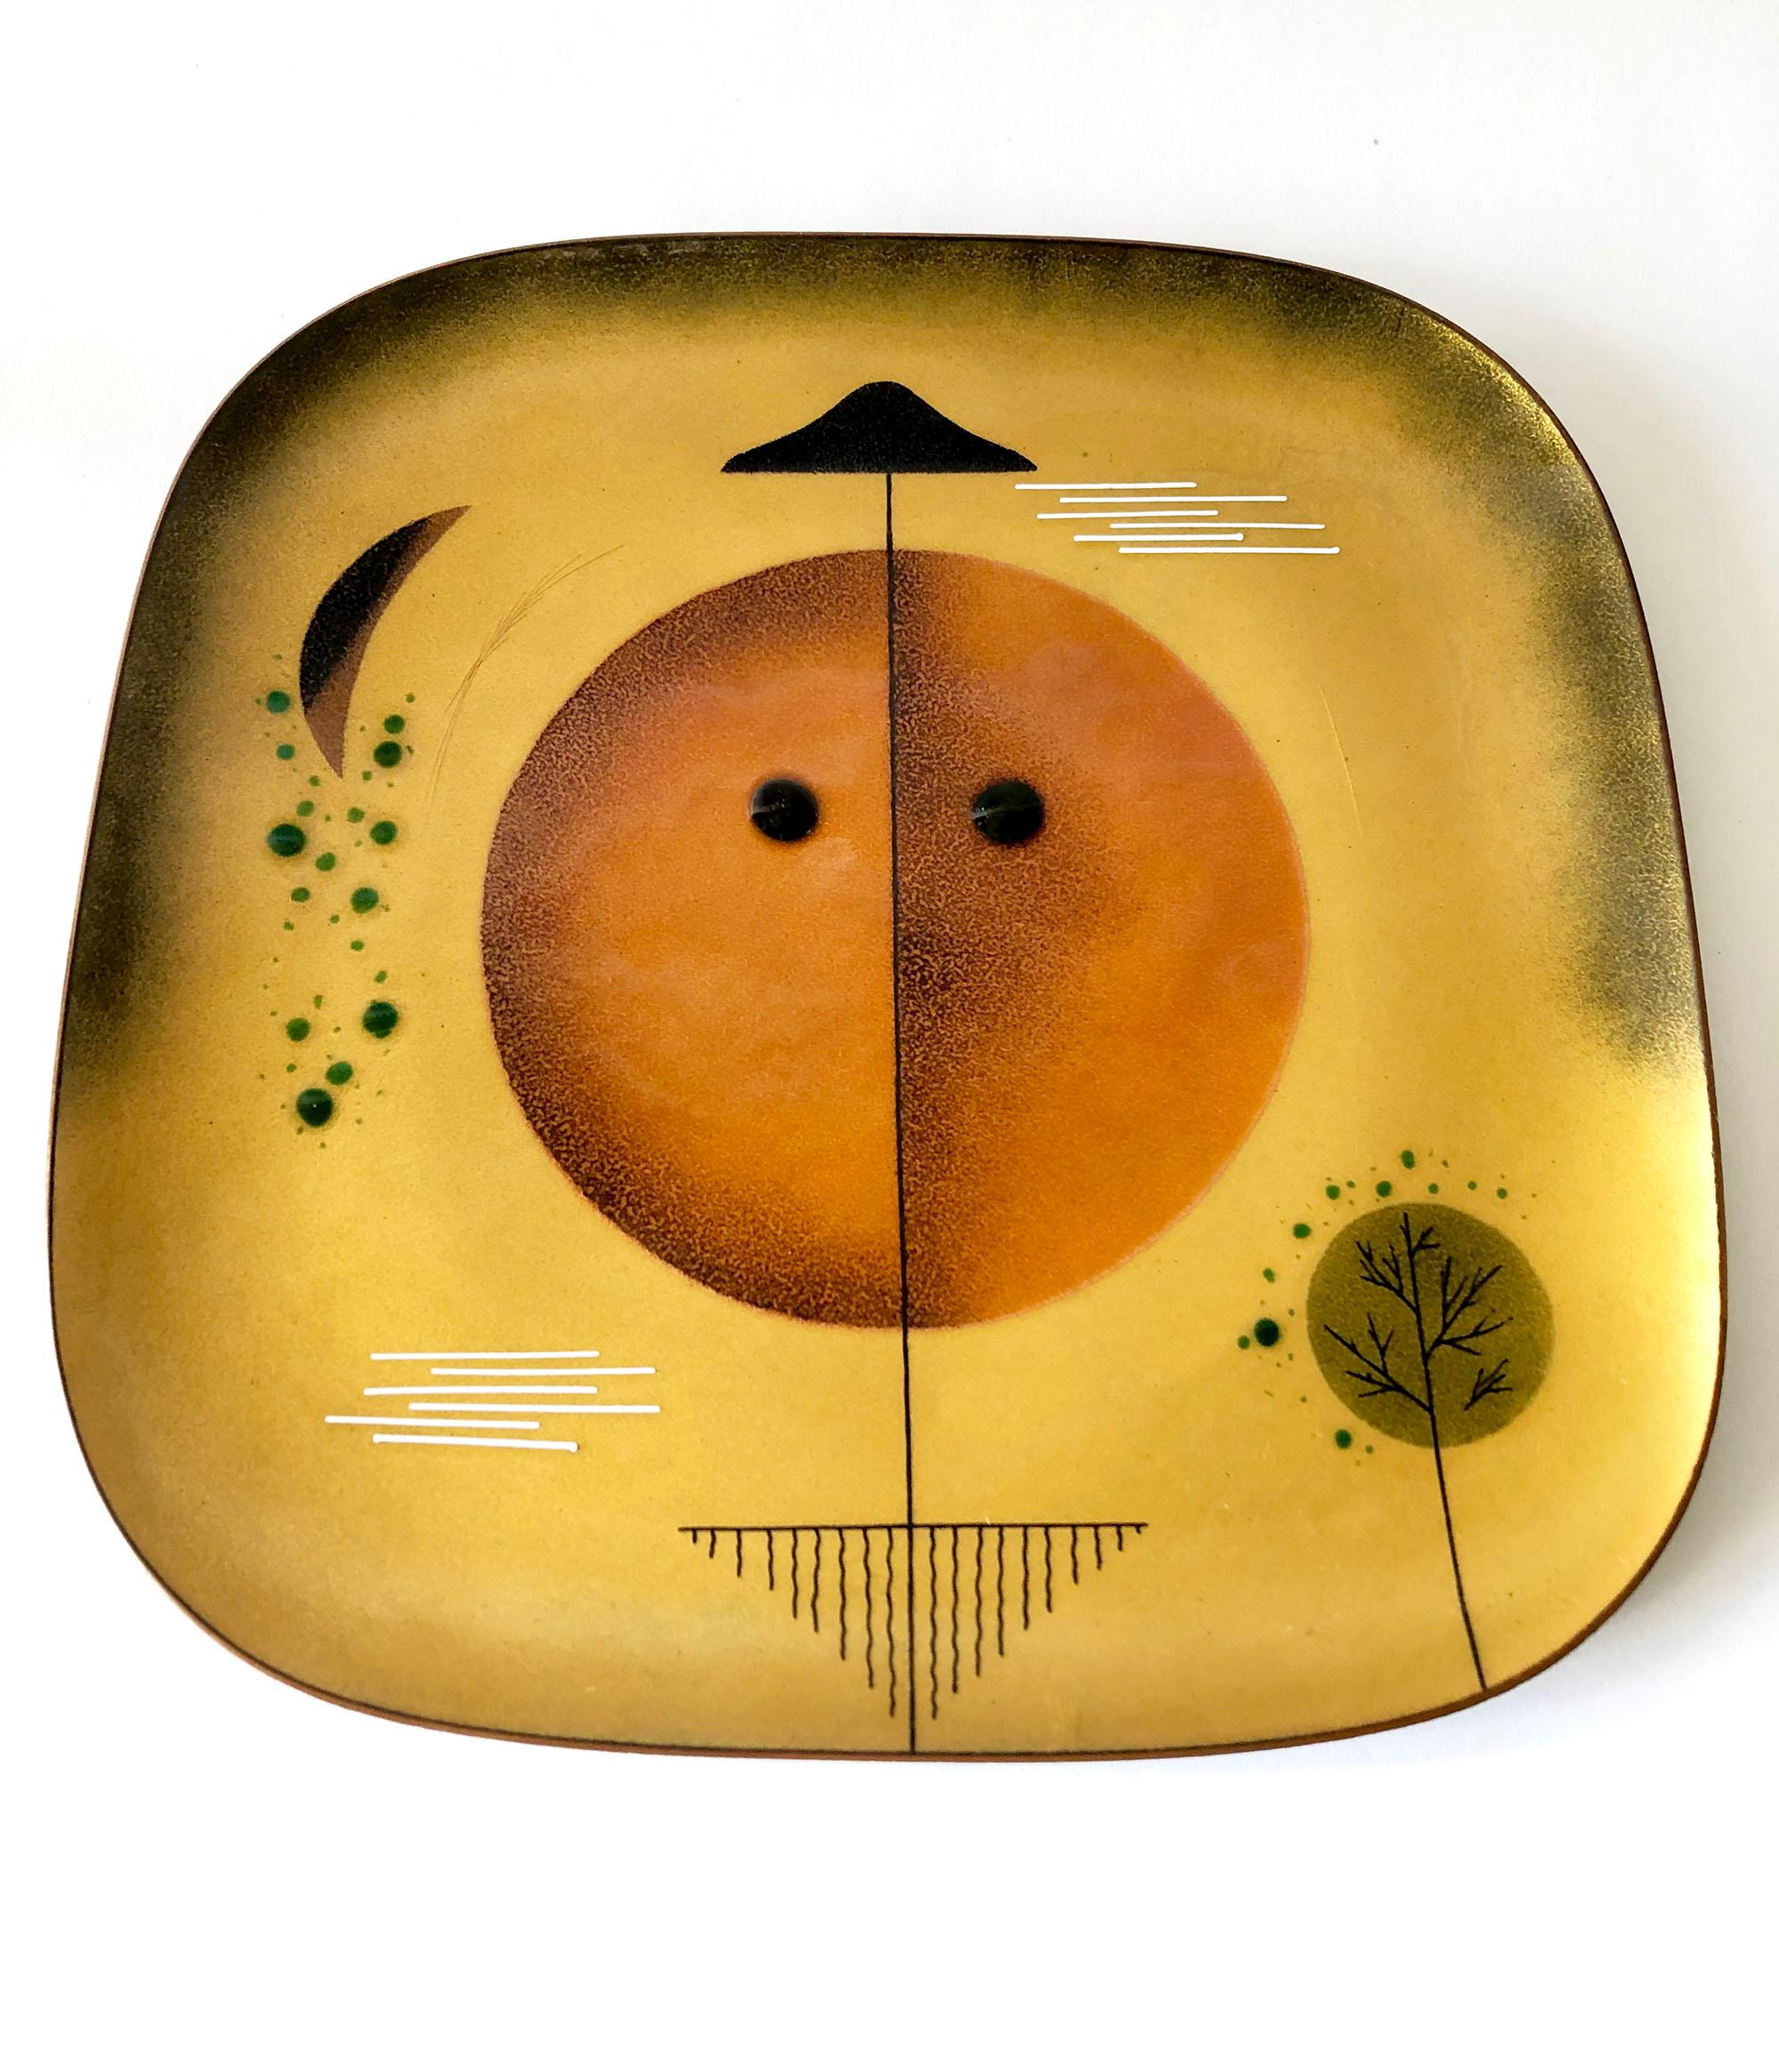 Mexican modernist copper enamel plate created by Miguel Pineda of Mexico City, Mexico. Piece measures 10.75